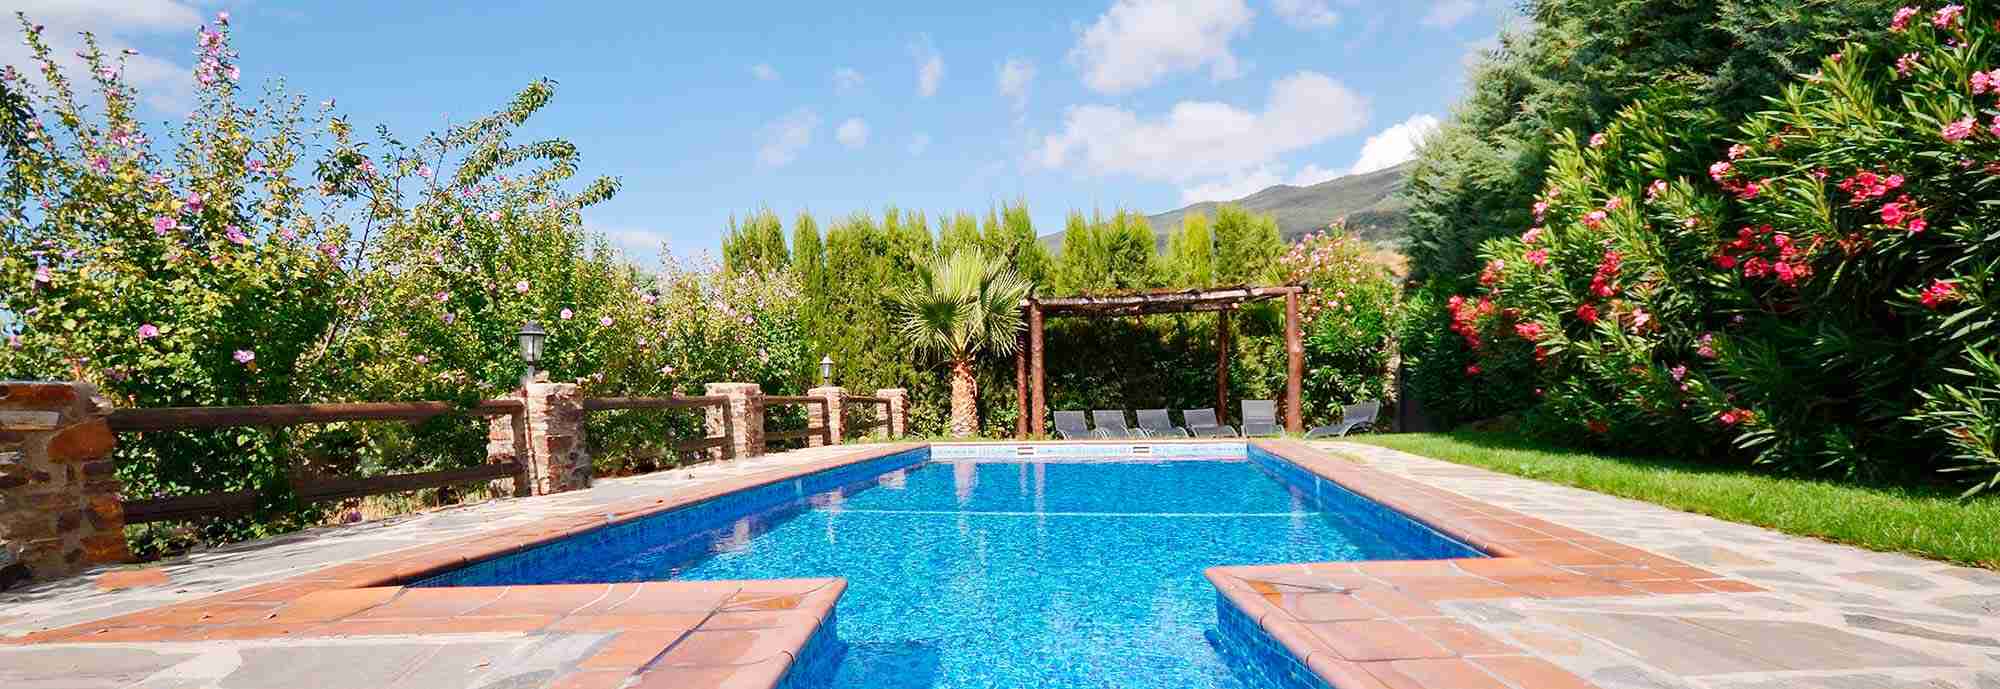 Attractive Alpujarra villa with gated pool in mountain seclusion